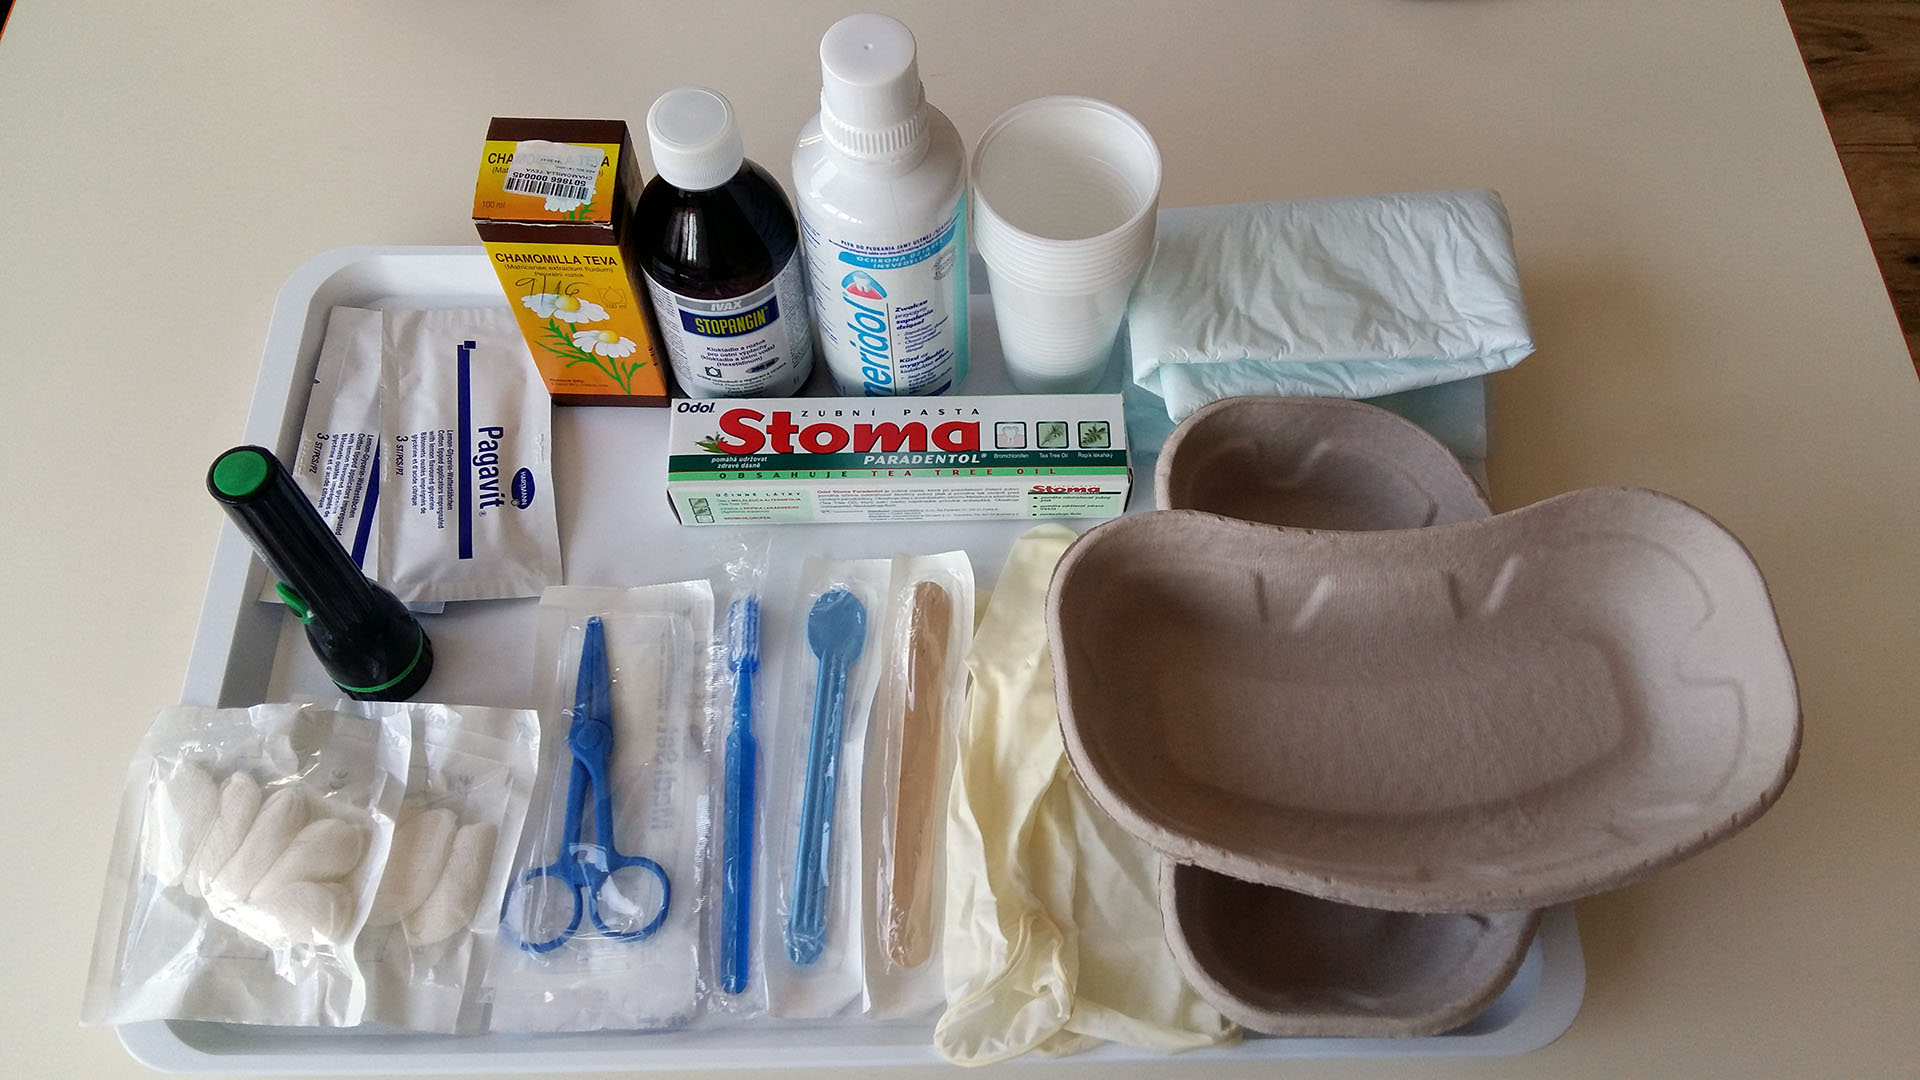 Equipment for oral cavity care